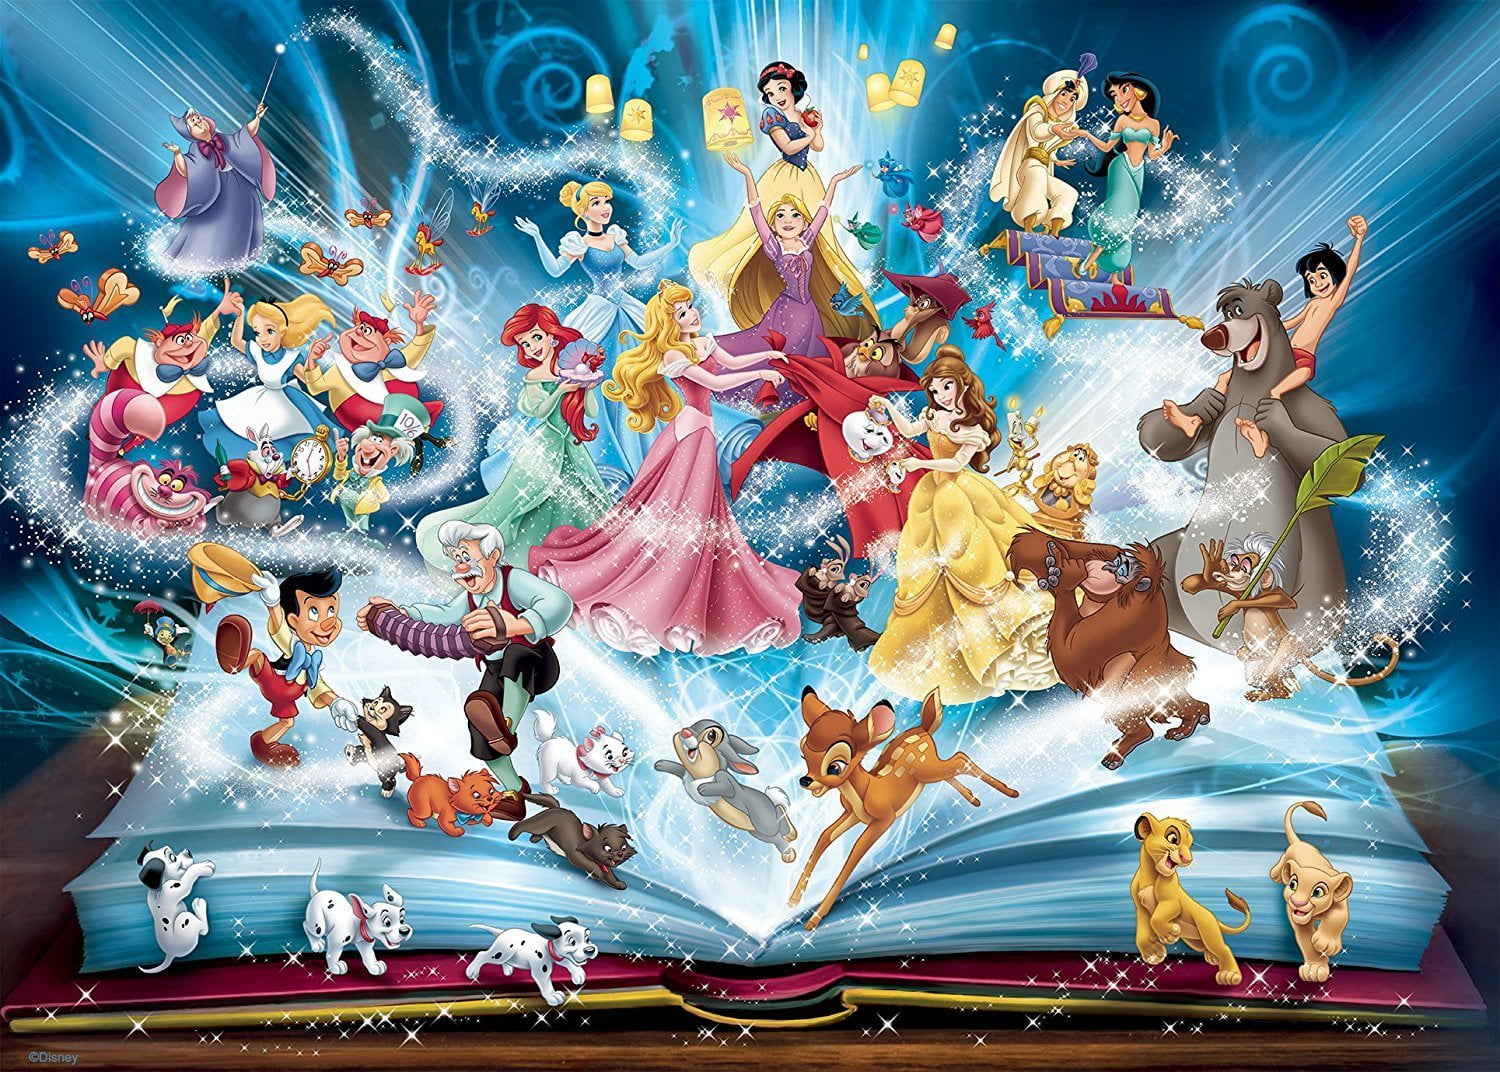 DISNEY MAGICAL STORY BOOK 1500 PC JIGSAW PUZZLE